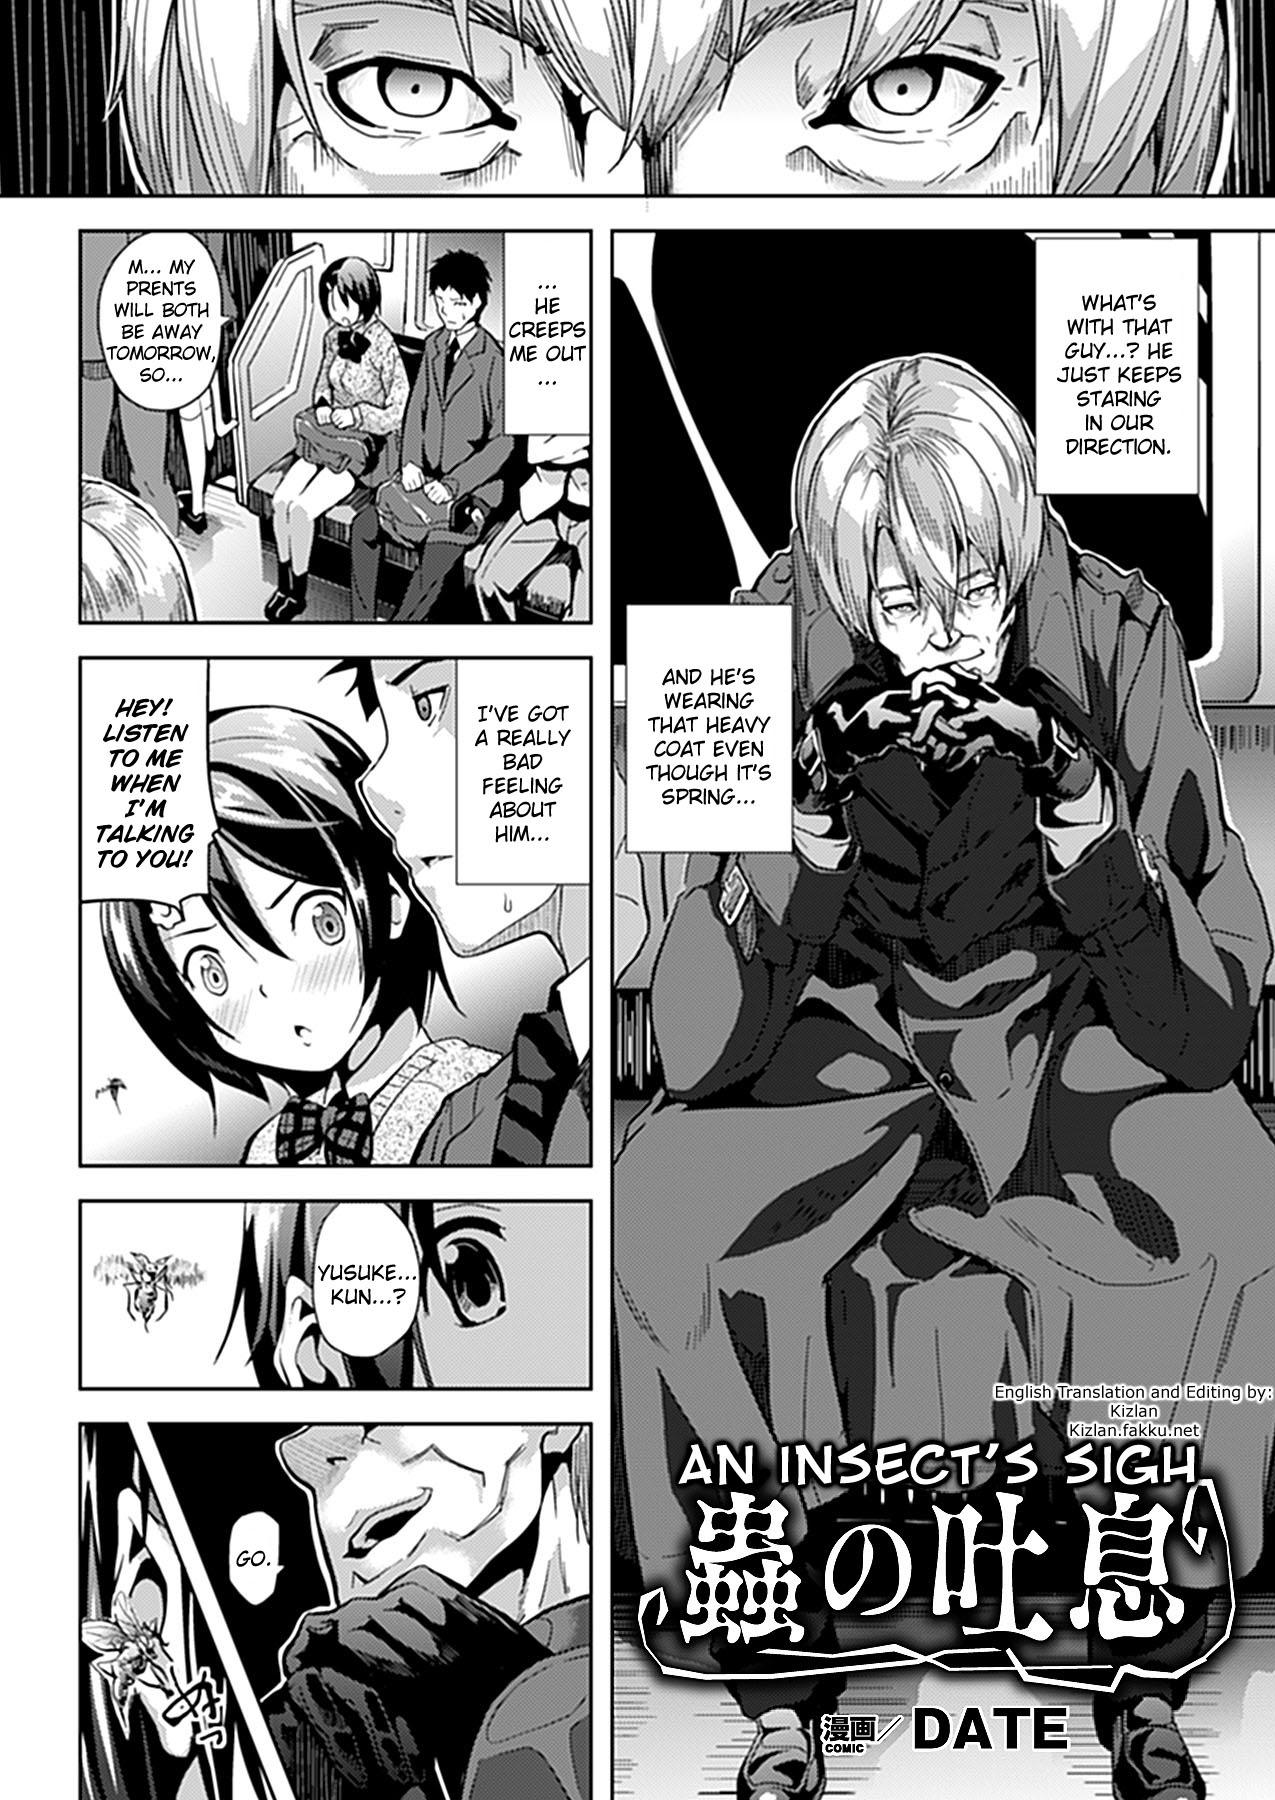 Hotporn Mushi no Toiki | An Insect's Sigh Female Domination - Page 2